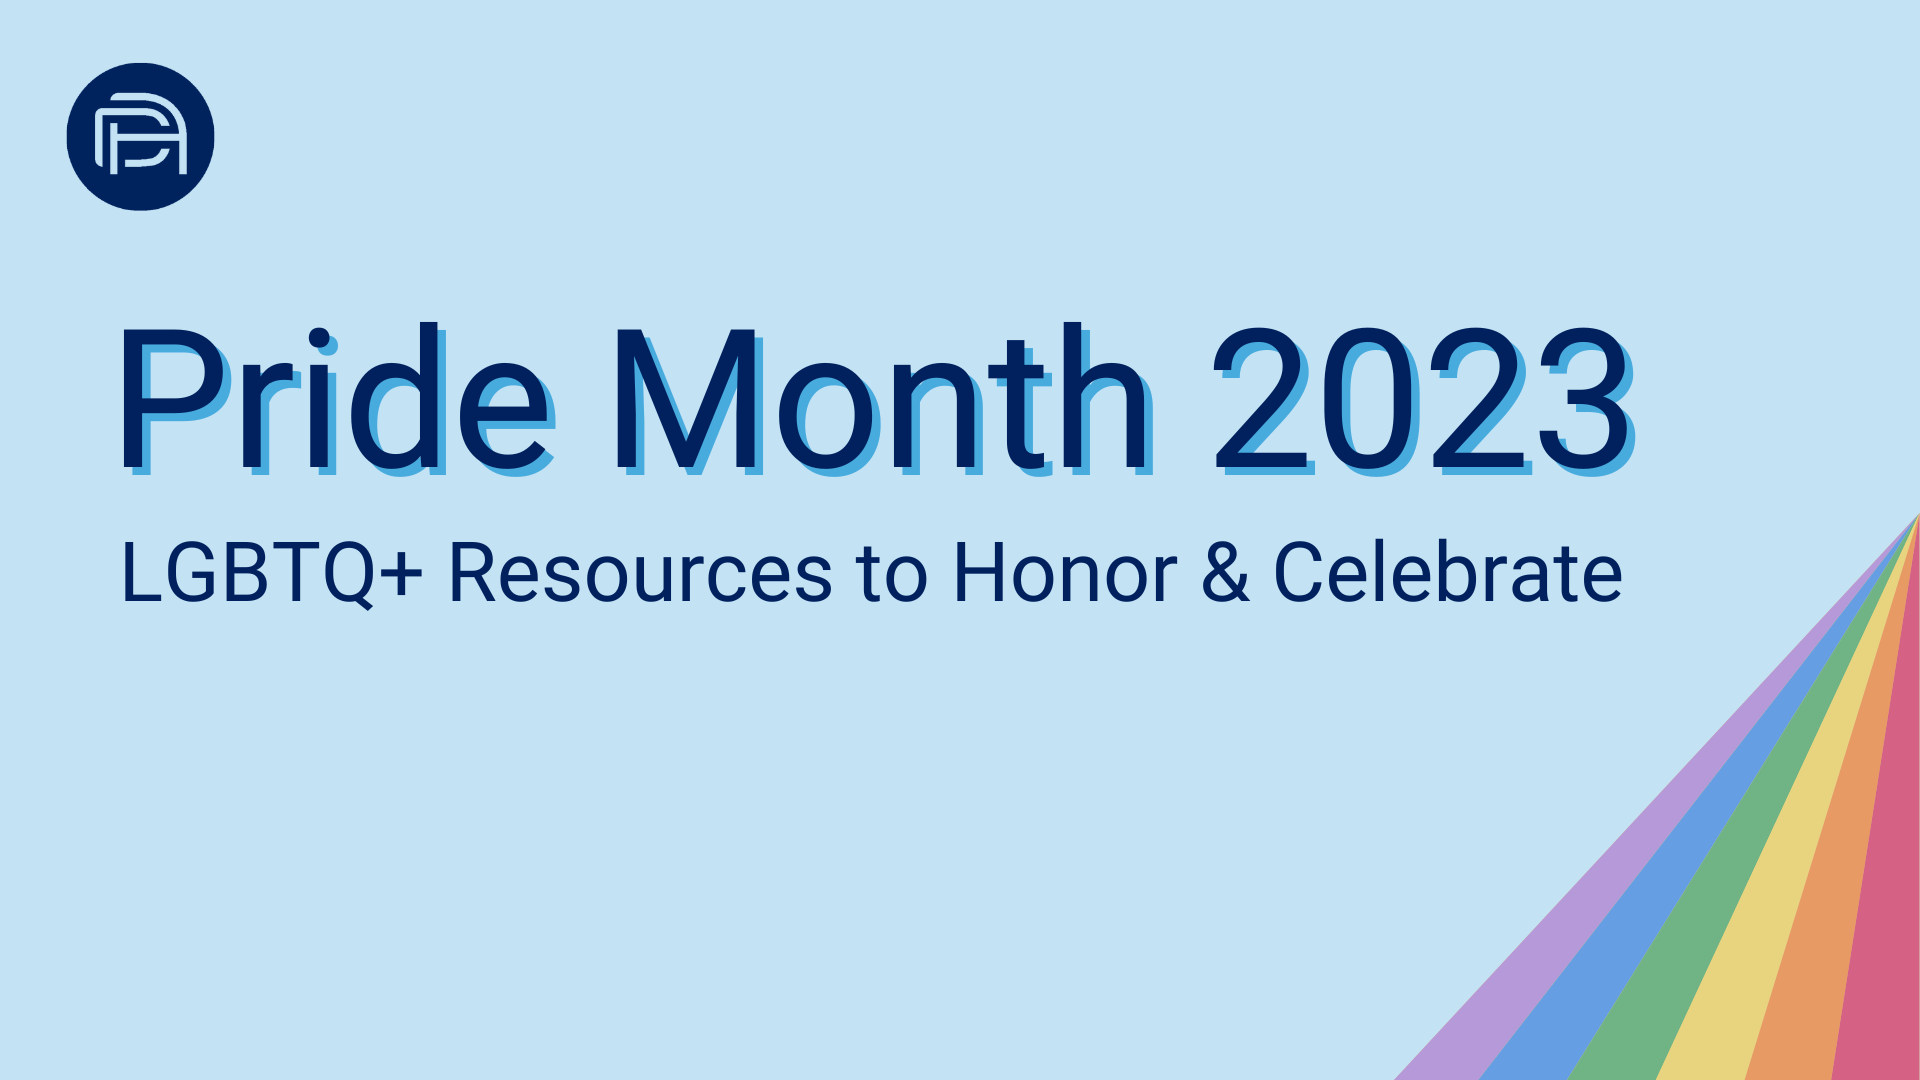 Pride Month 2023: LGBTQ+ Resources to Honor & Celebrate